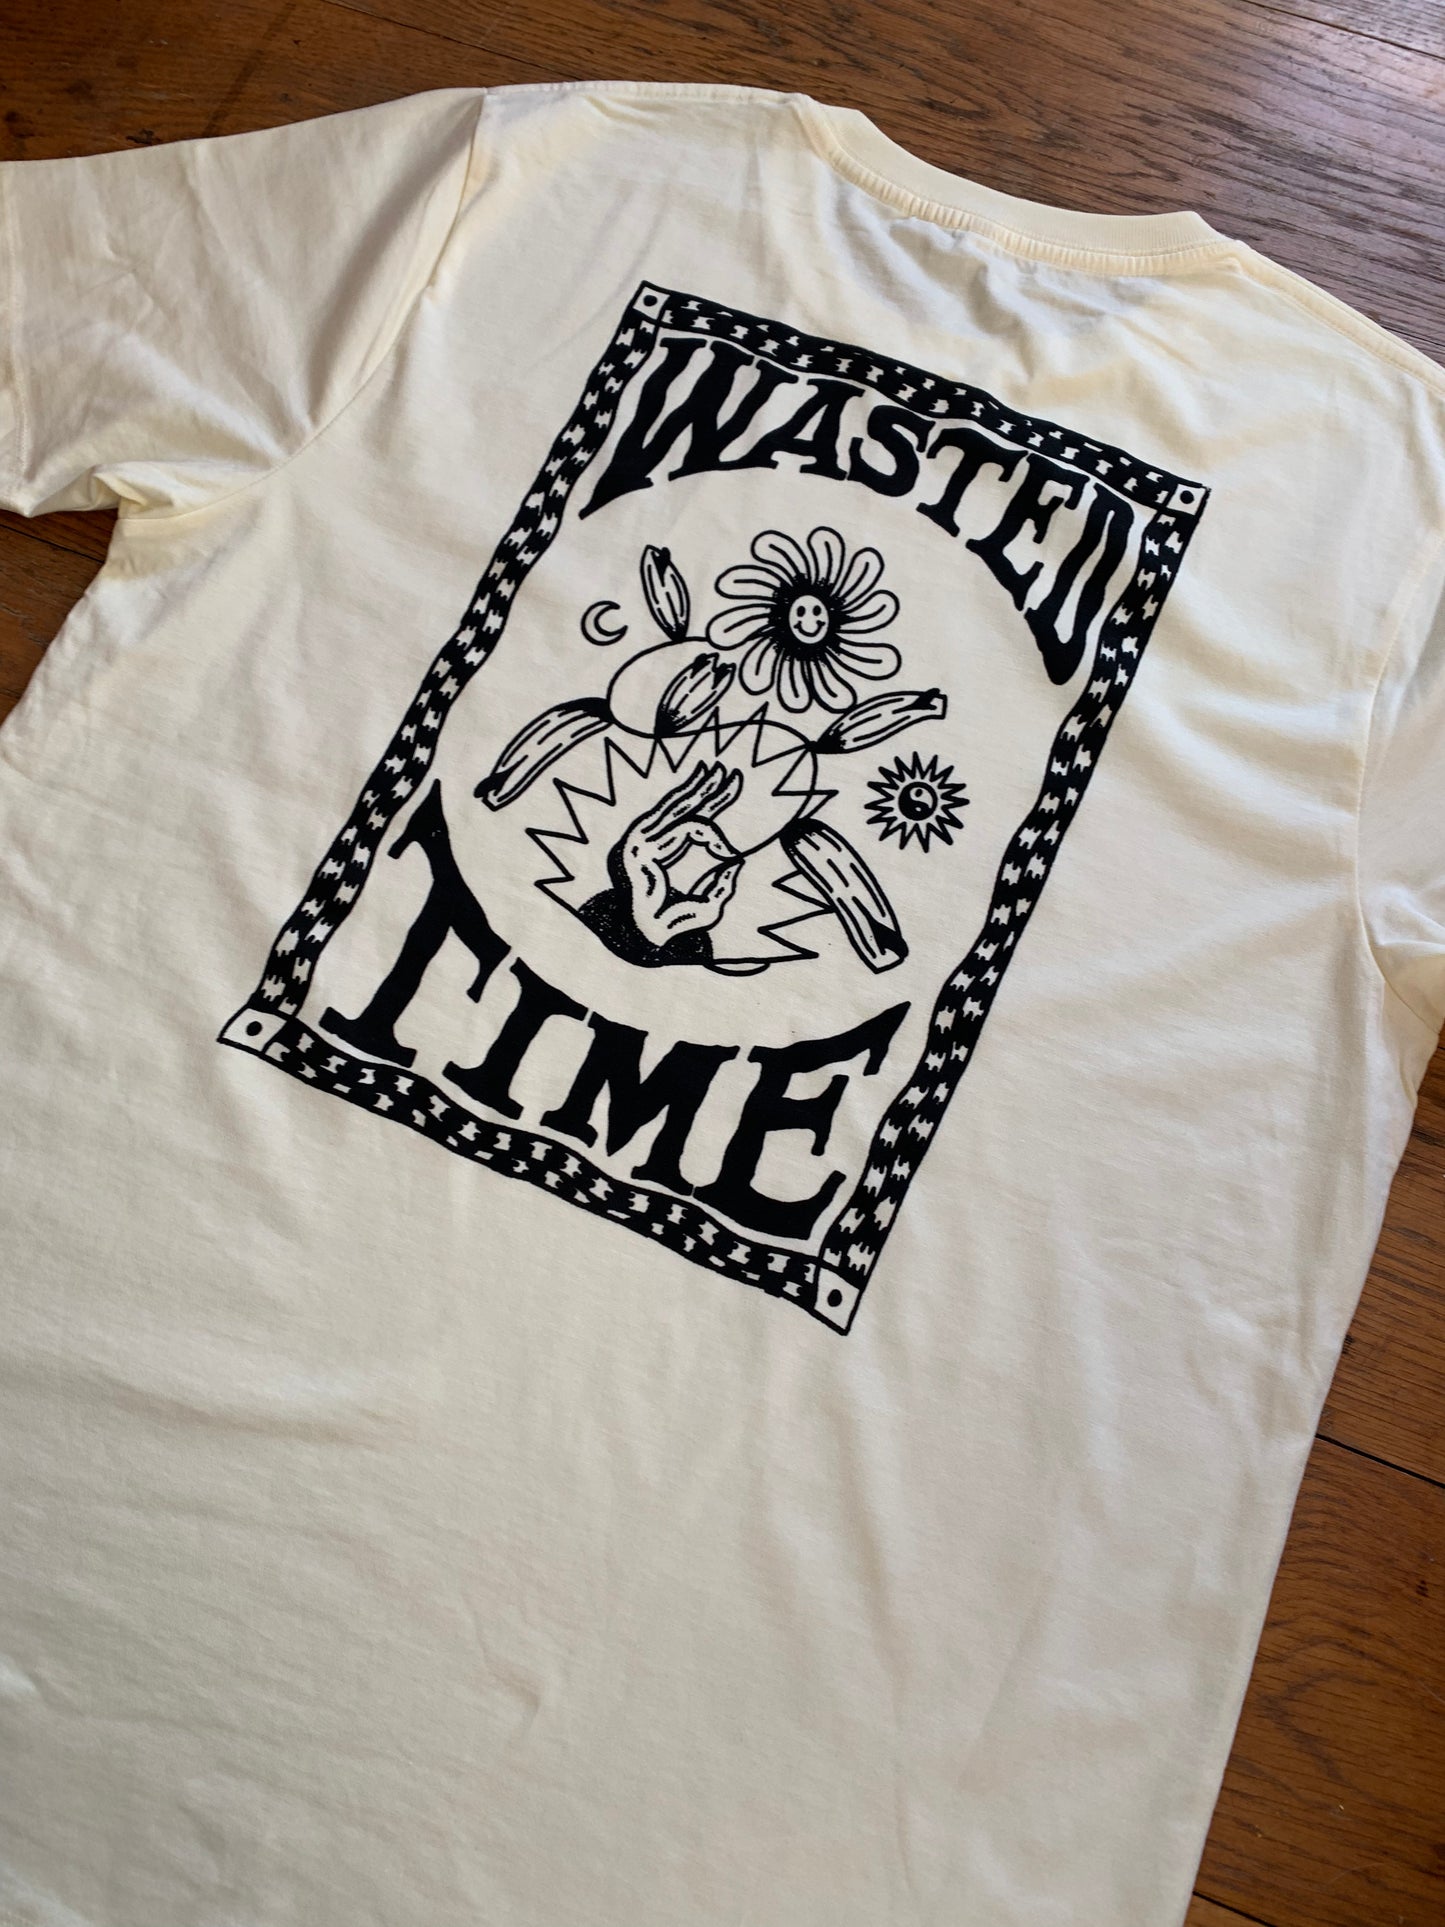 Wasted Time T-shirt